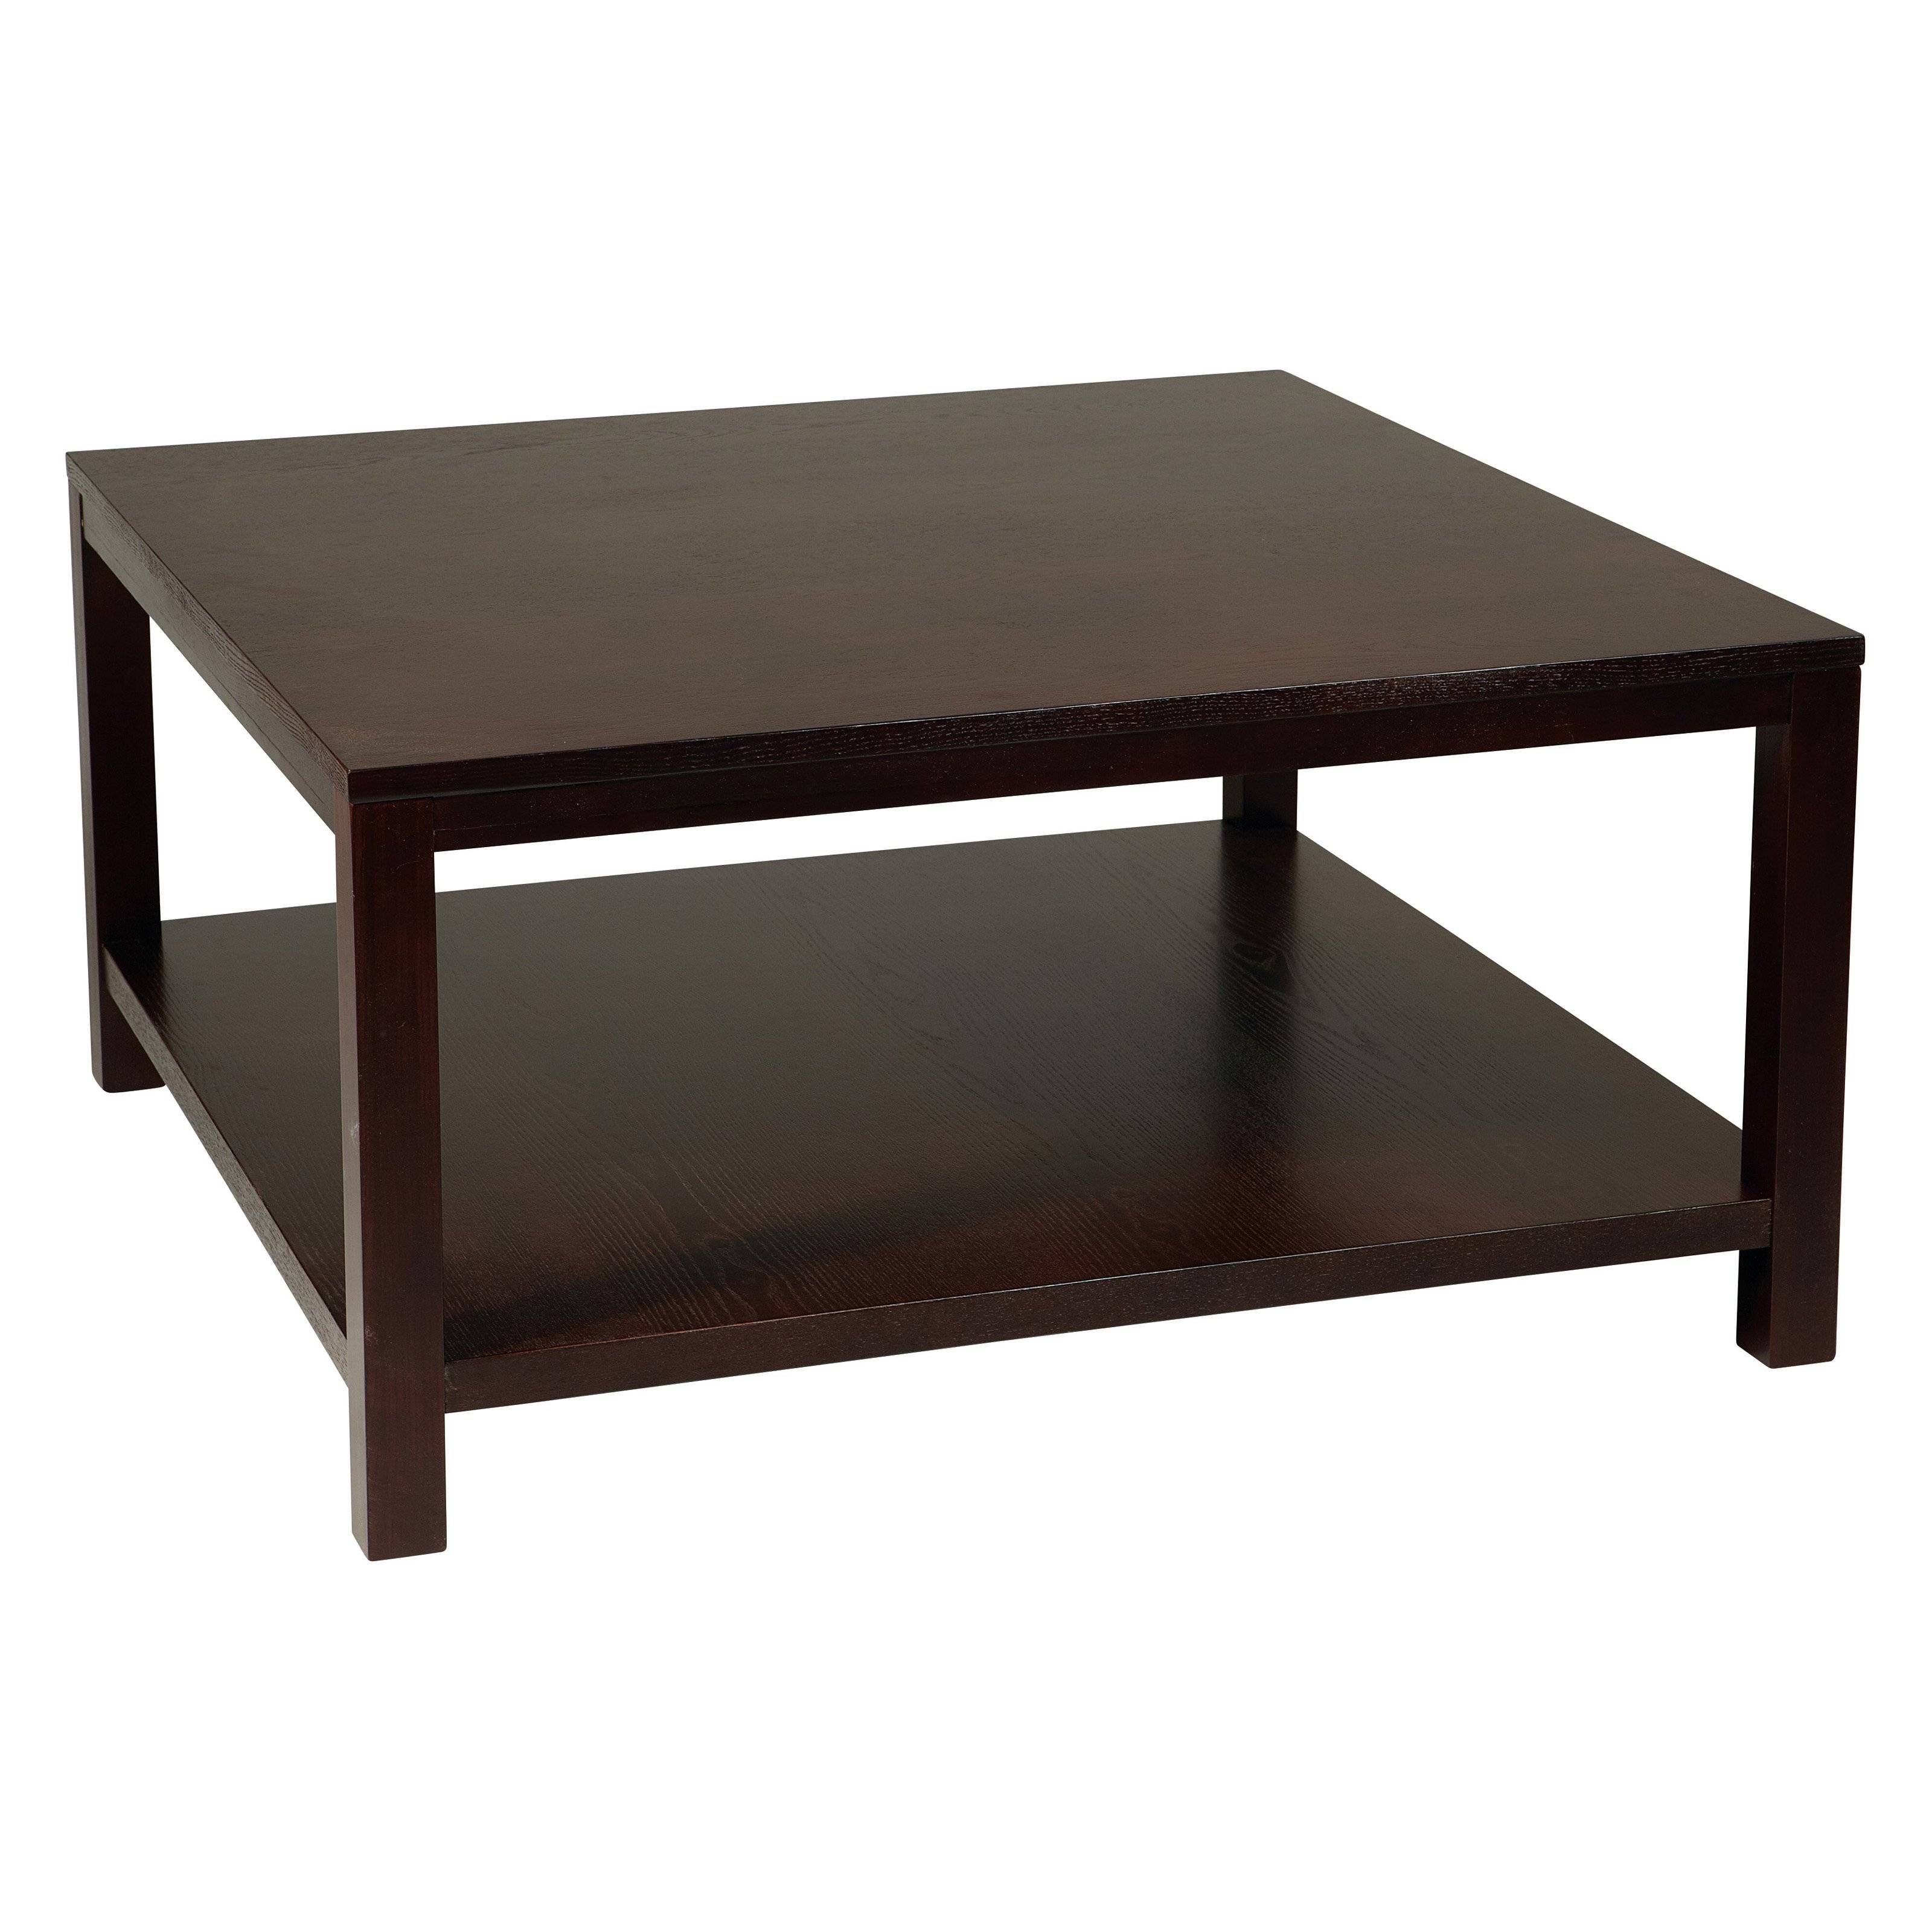 Furniture: Alluring Espresso Coffee Table For Stunning Home Intended For Rustic Coffee Tables With Bottom Shelf (View 28 of 30)